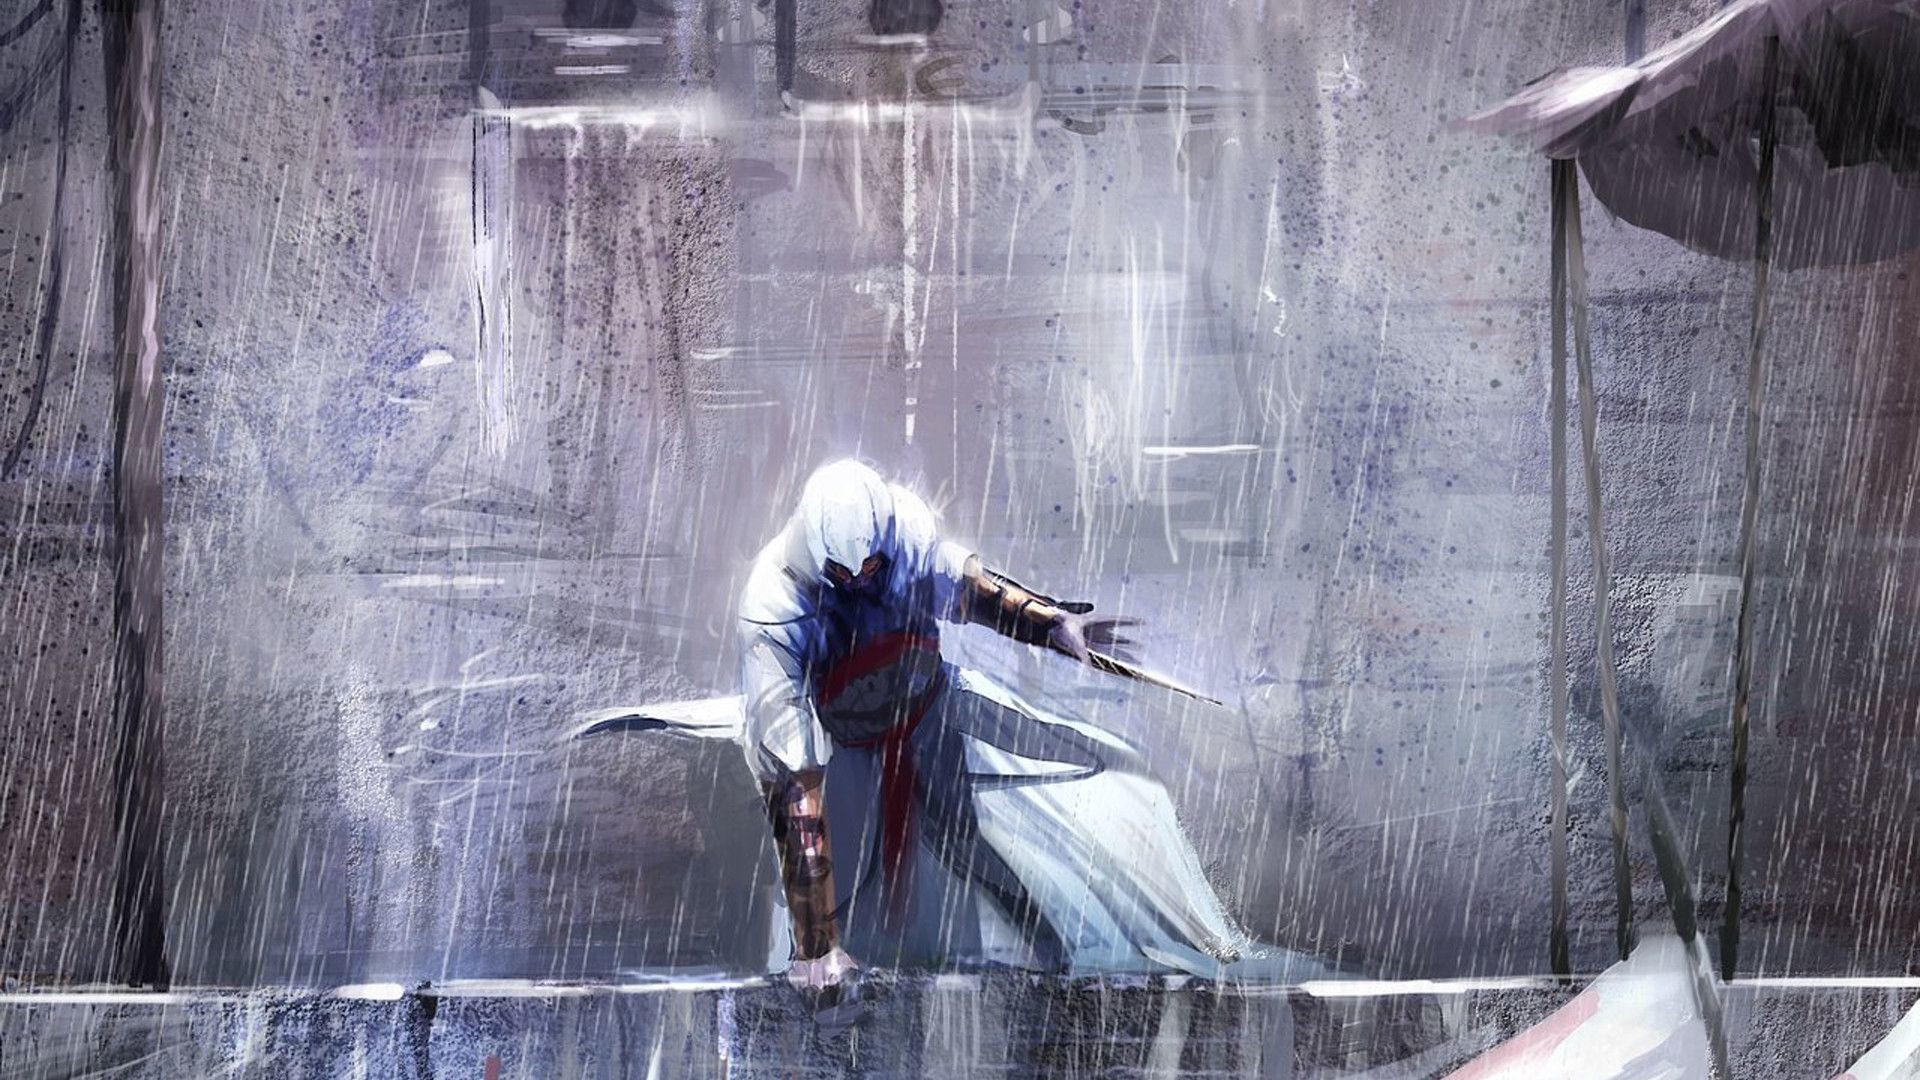 1920x1080 Assassin's Creed on Pinterest | 24 Pins